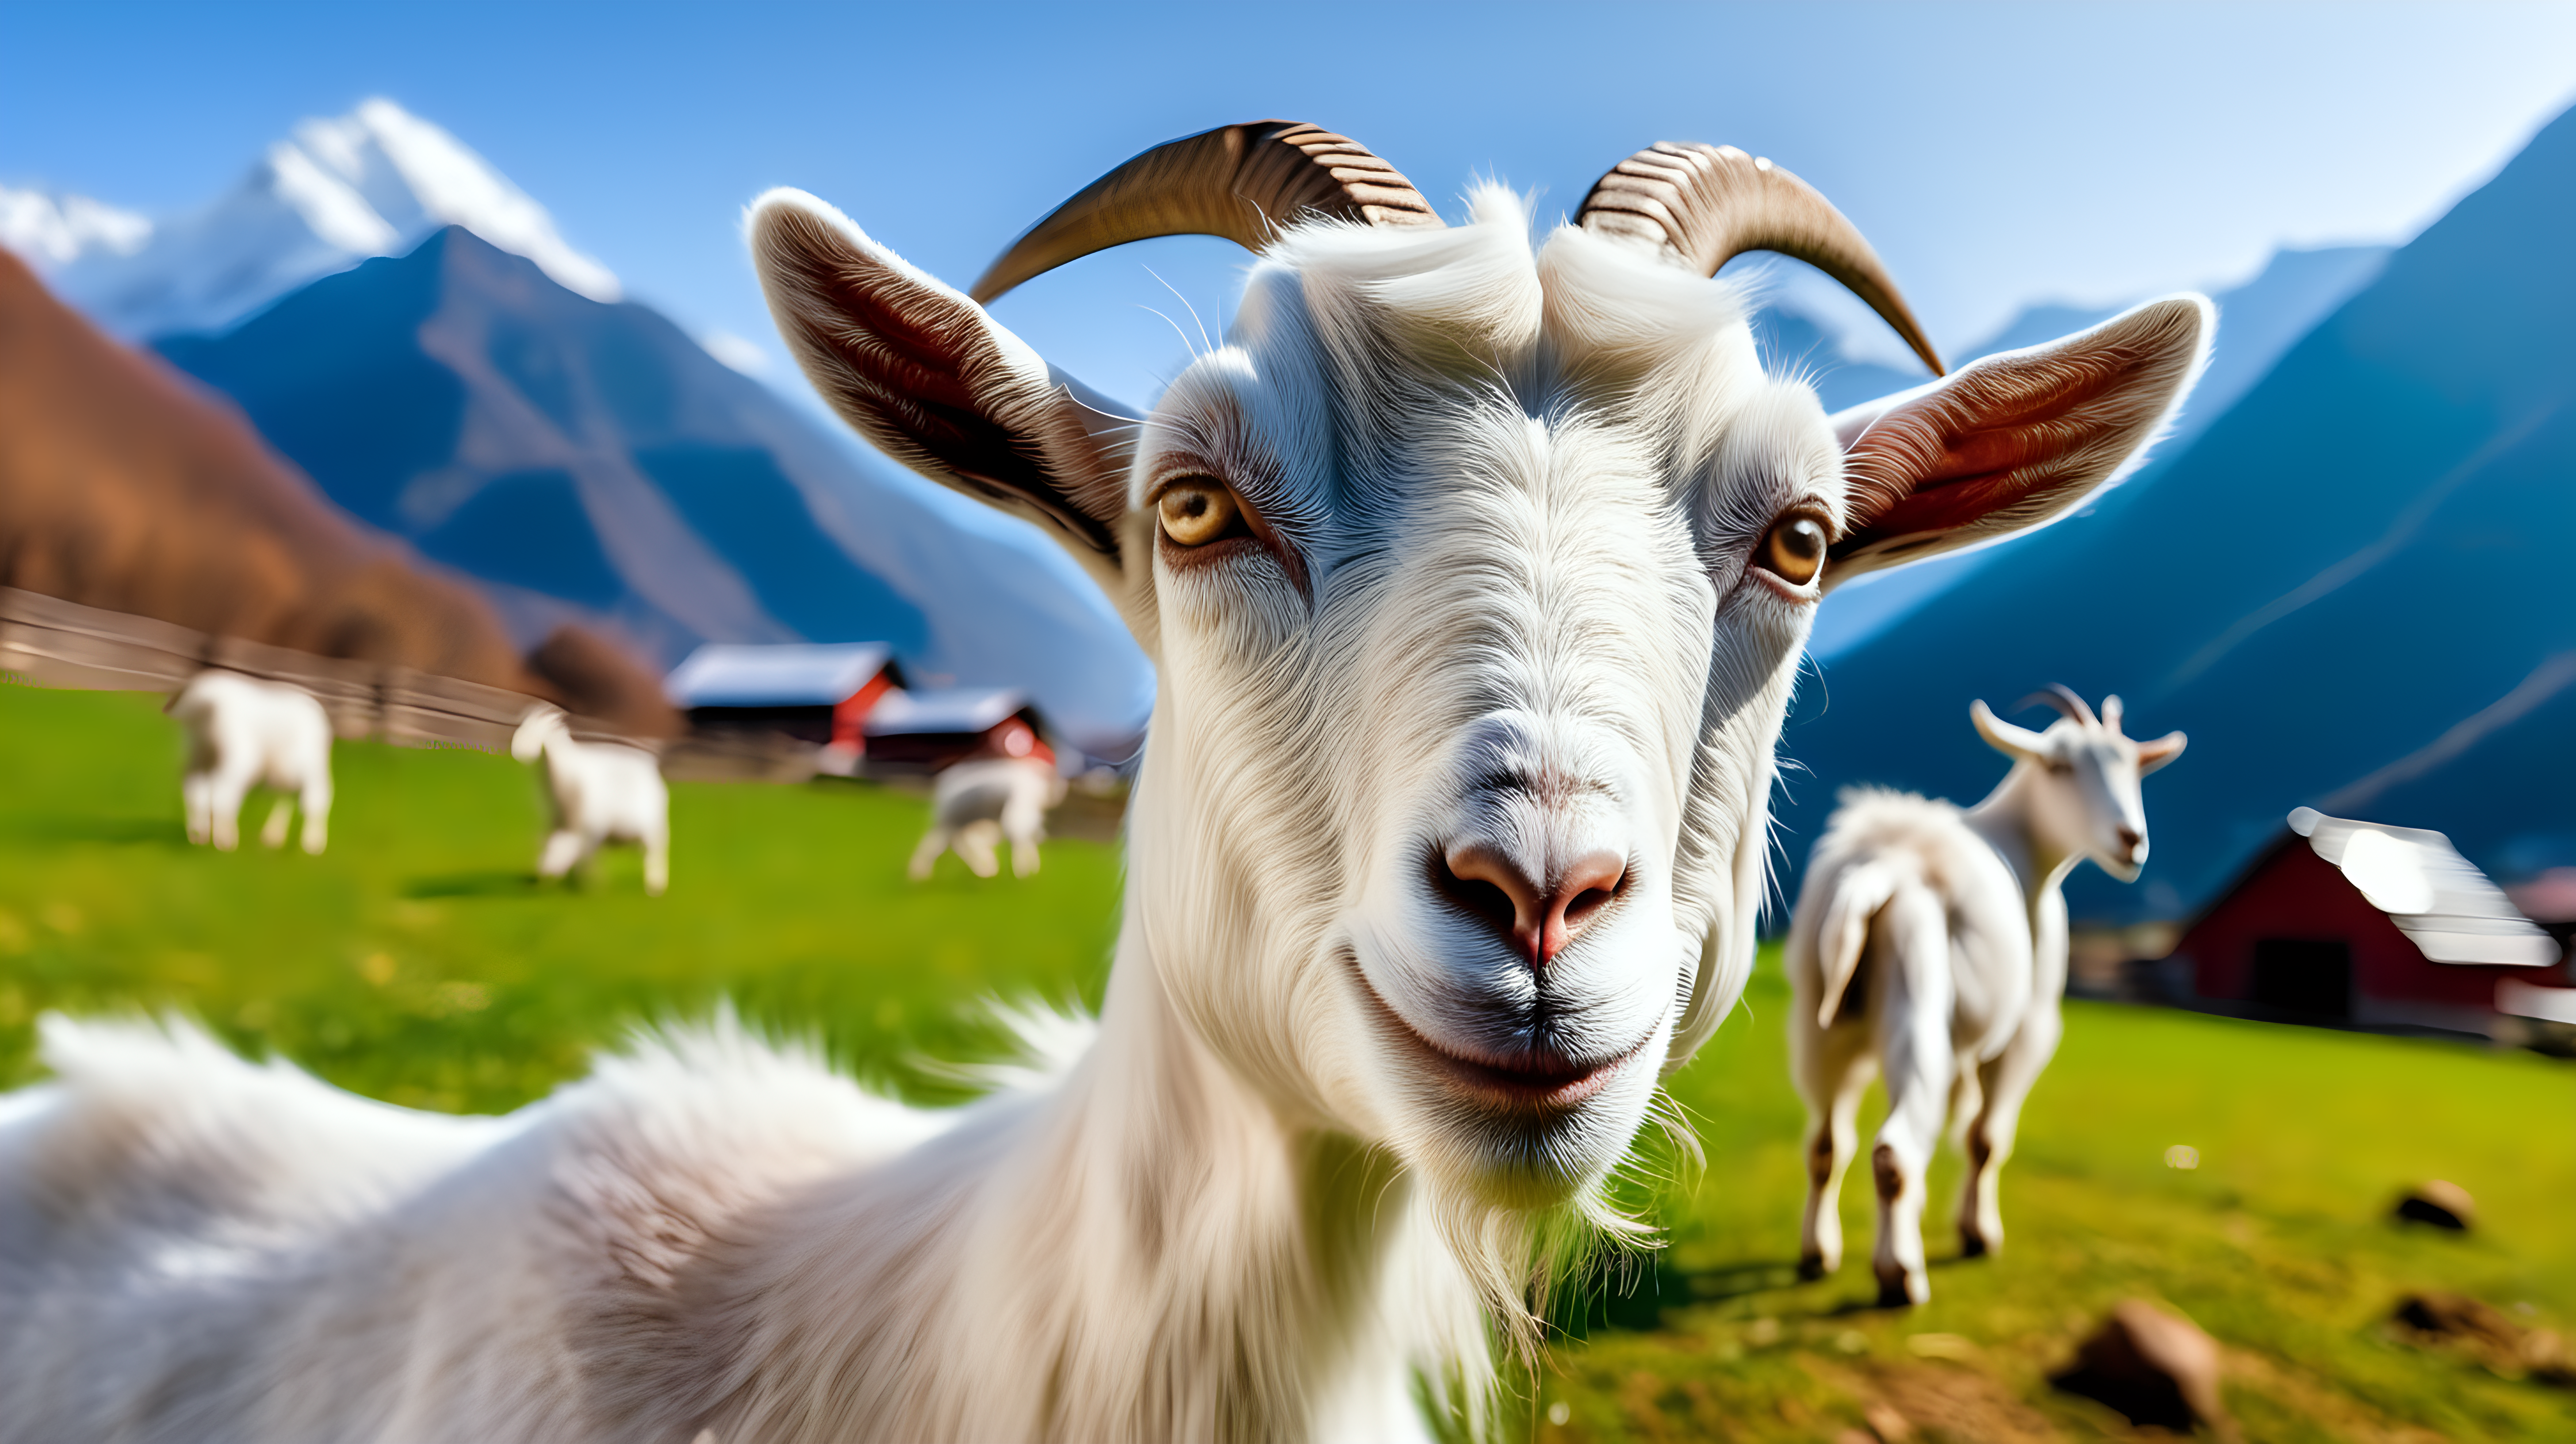 Healthy goat in the farm mountain background